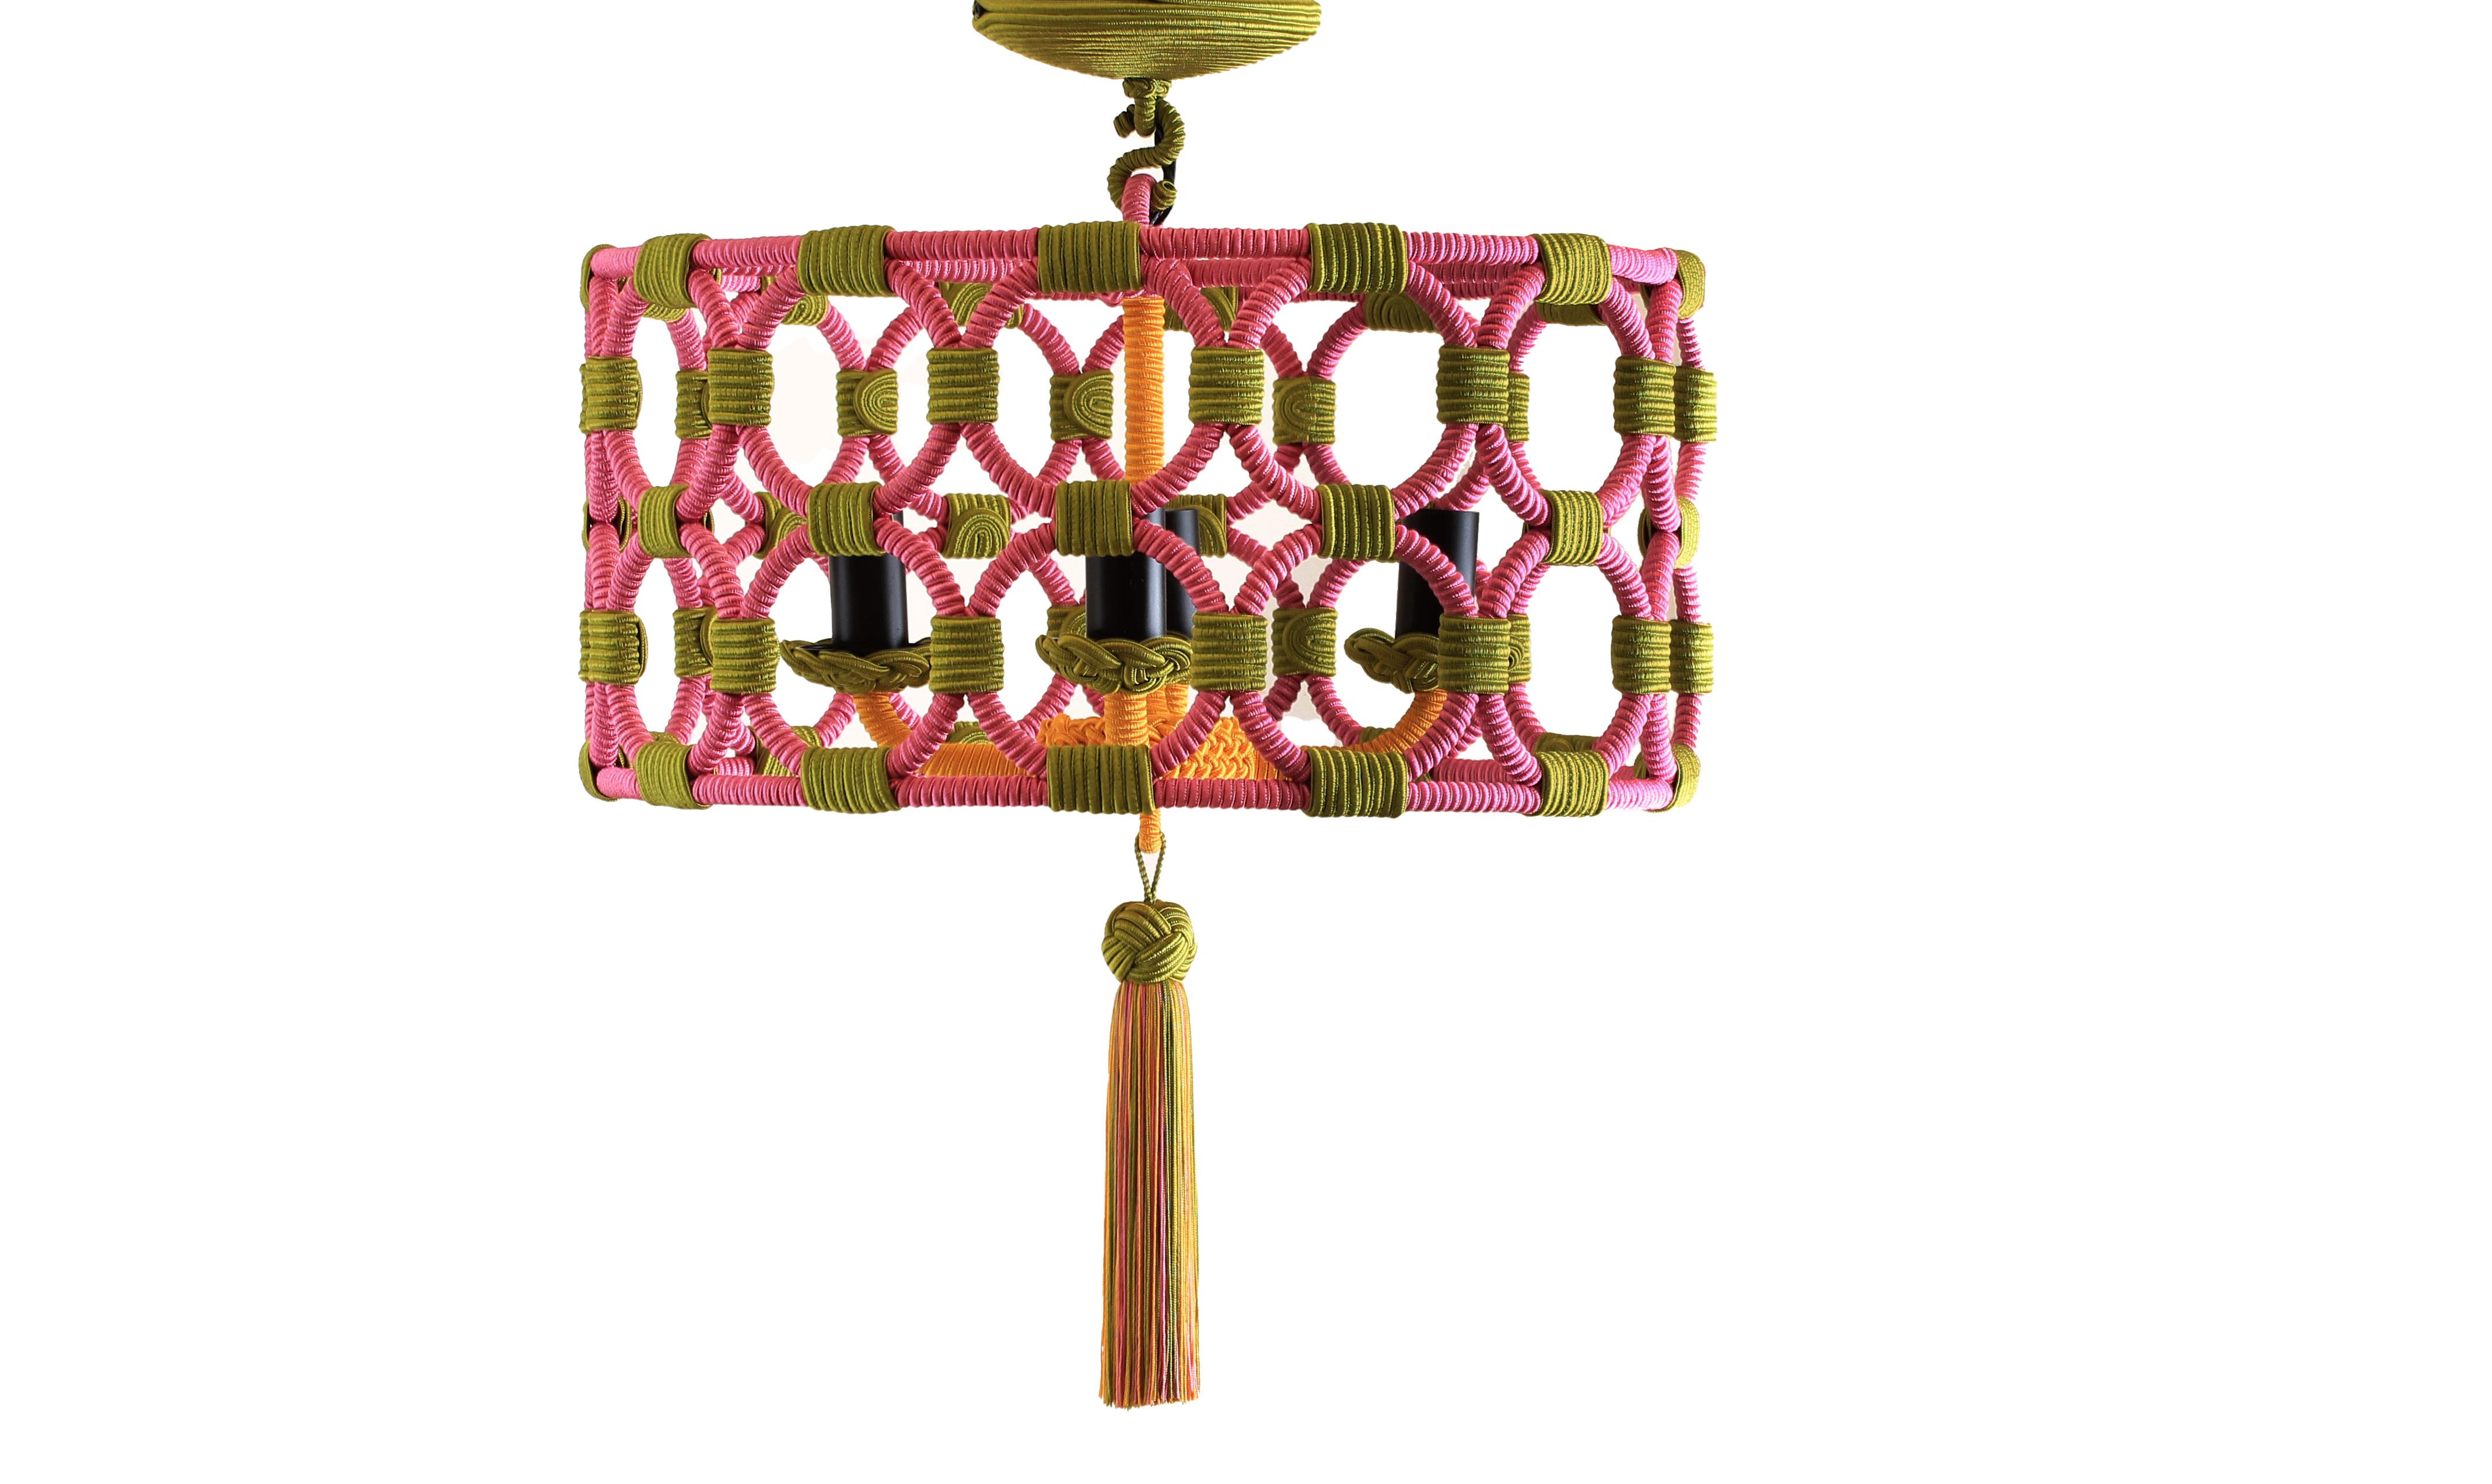 The four armed candle light fixture is enclosed by a wrought iron drum structure made of a multitude of rings, wrapped and attached with our traditional silk passementerie, resulting in a sleek contemporary pendant. Custom sizes and finishes